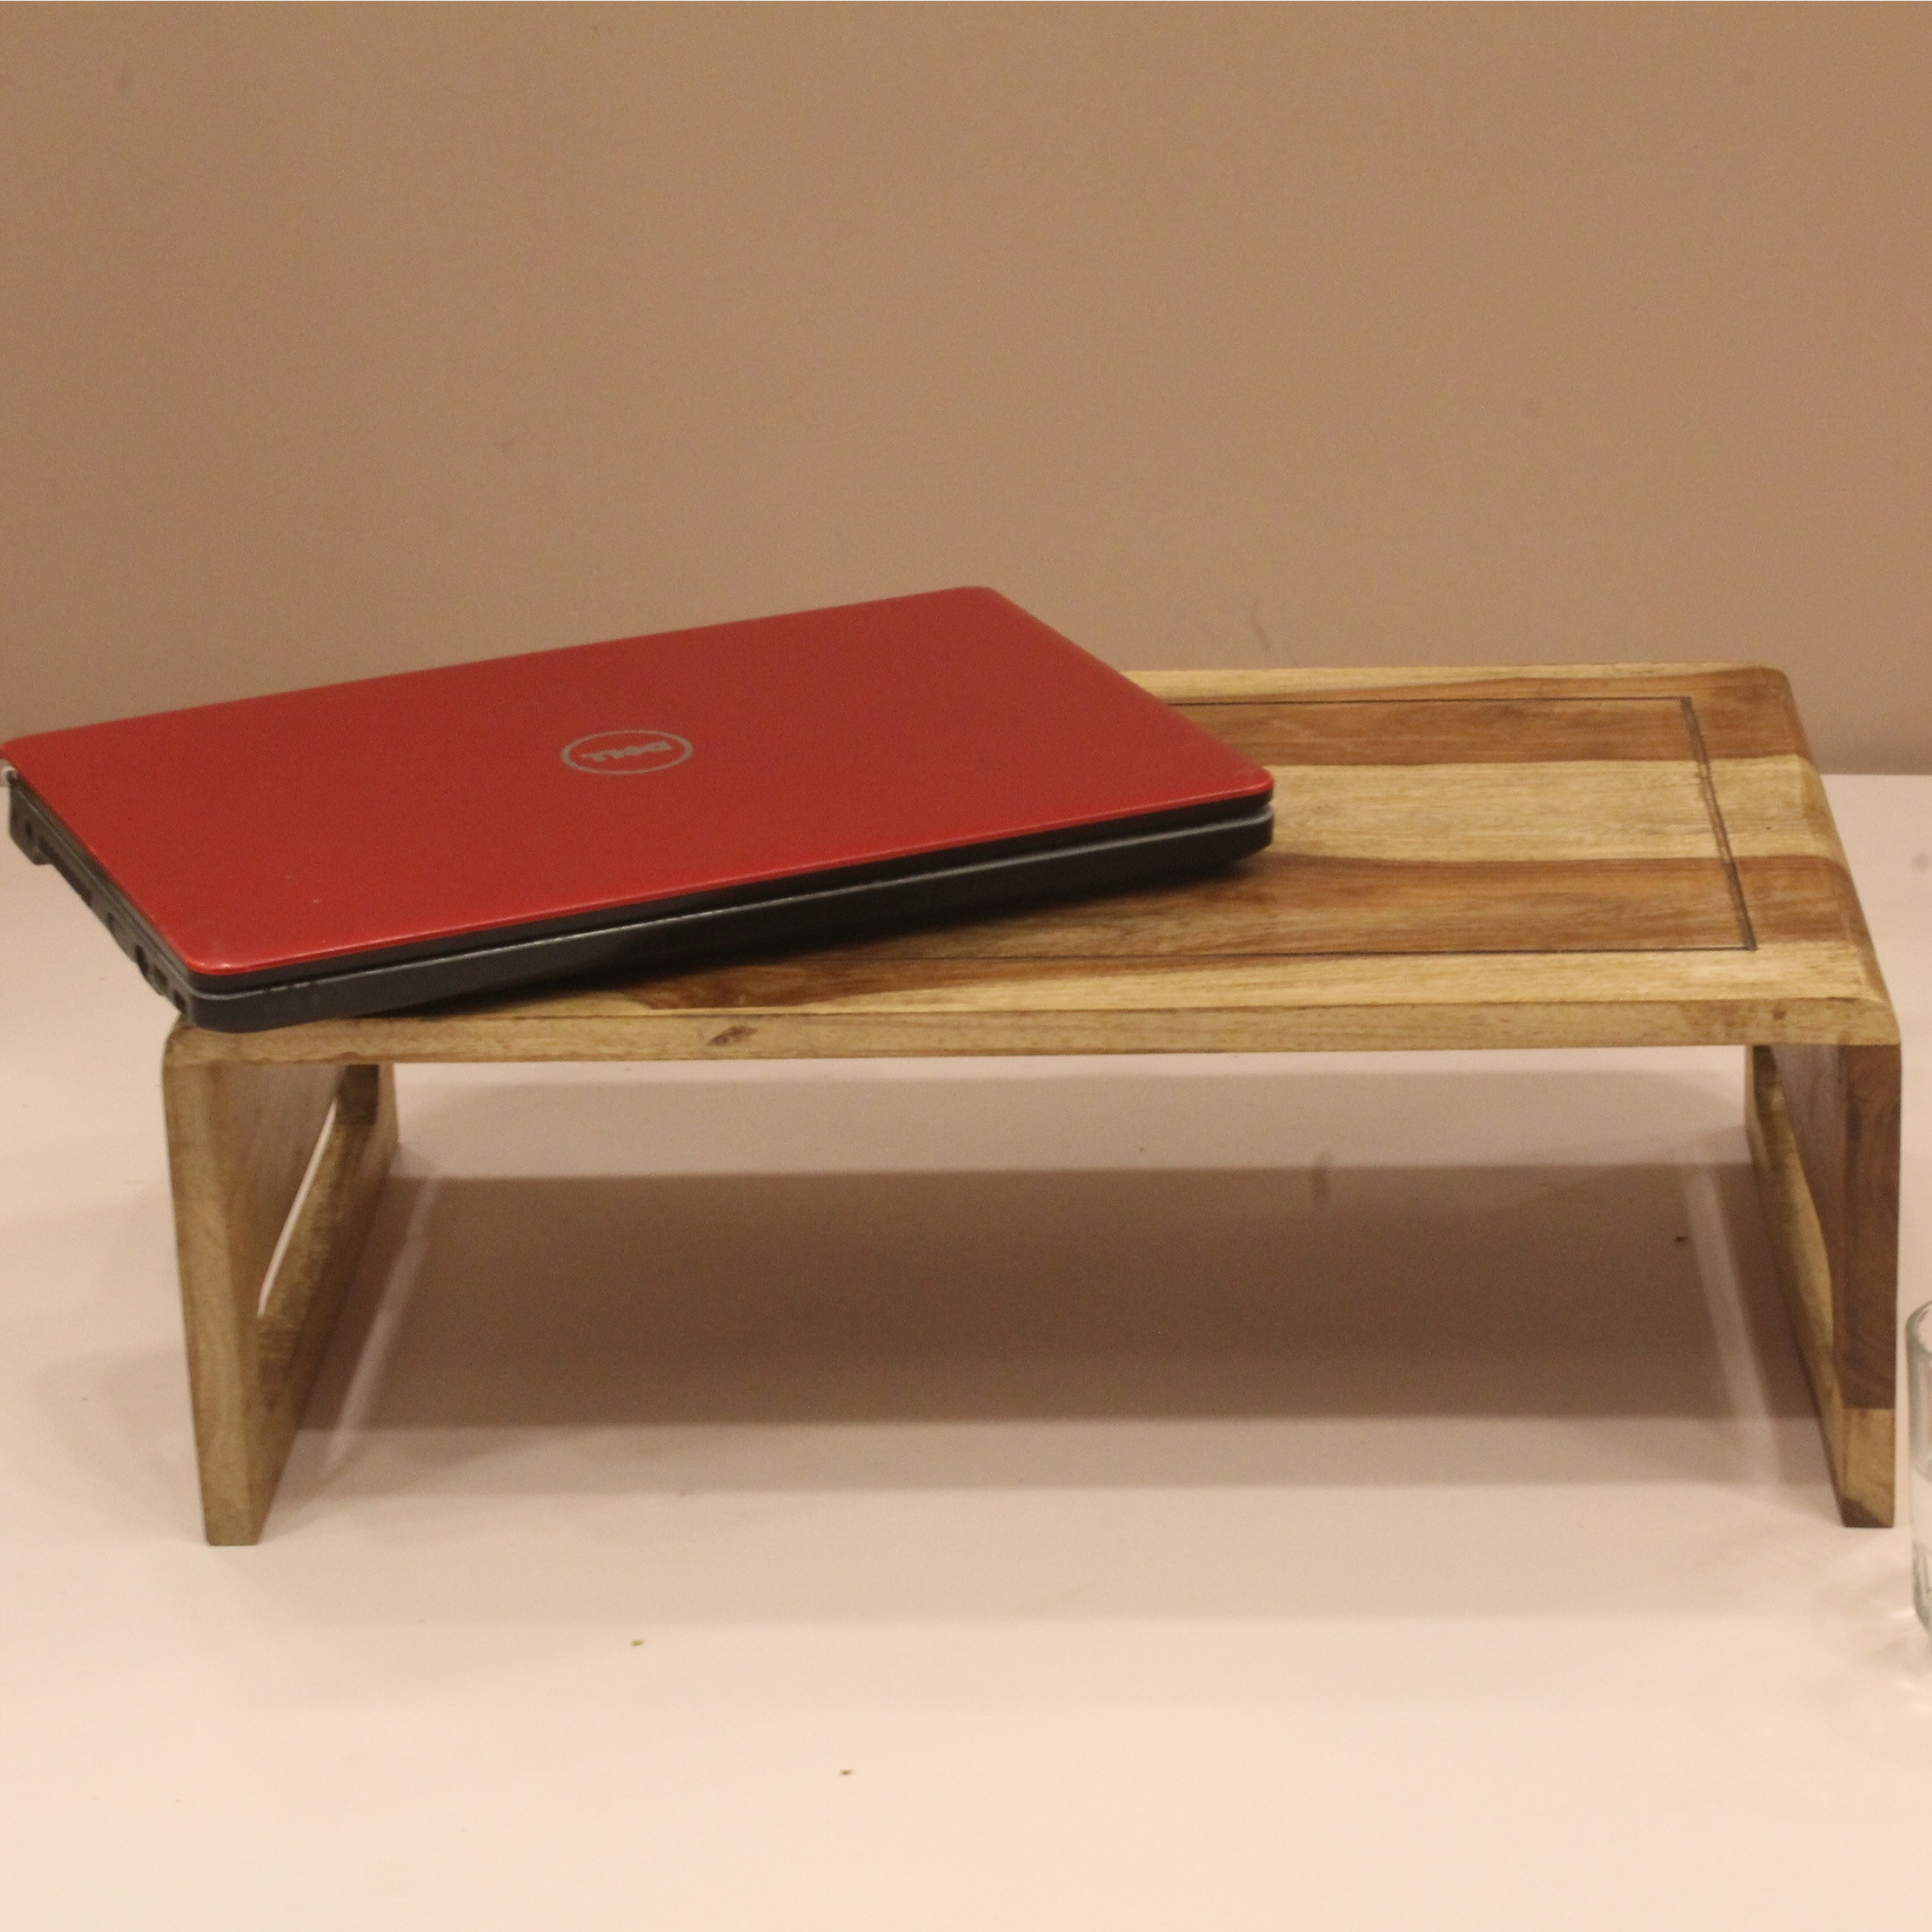 Aachman Bed Laptop Table